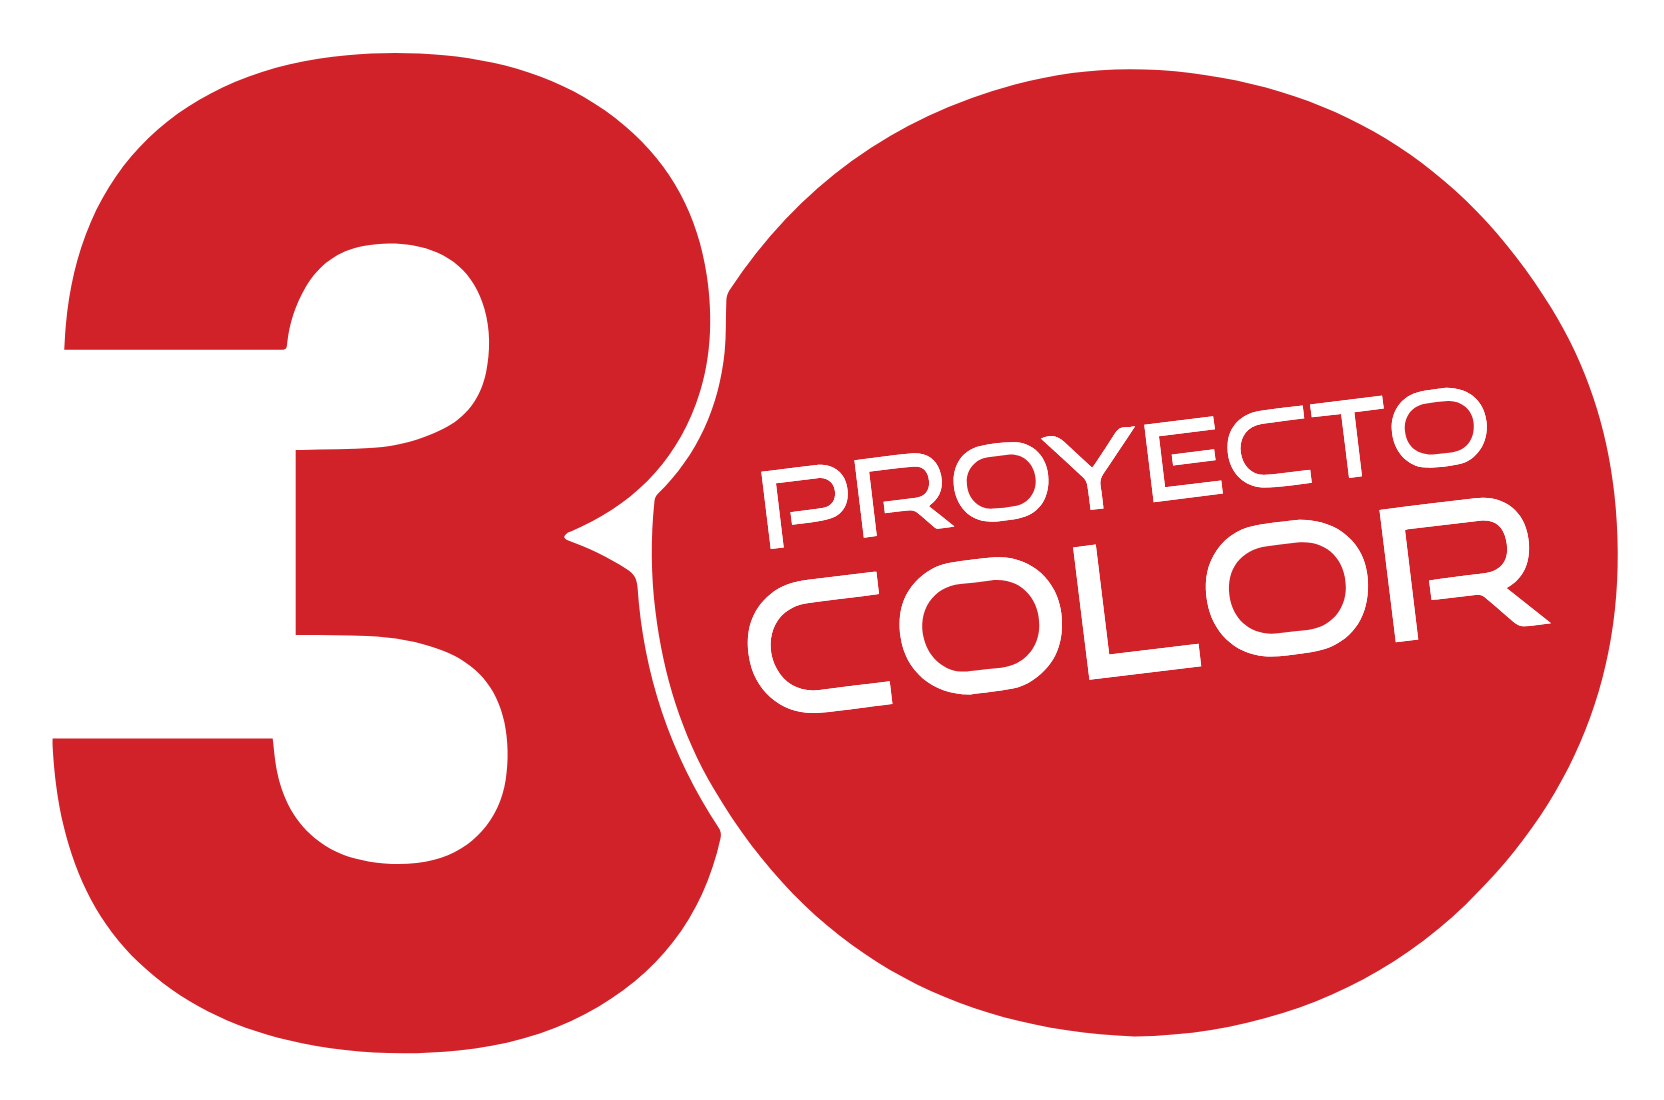 Proyecto Color